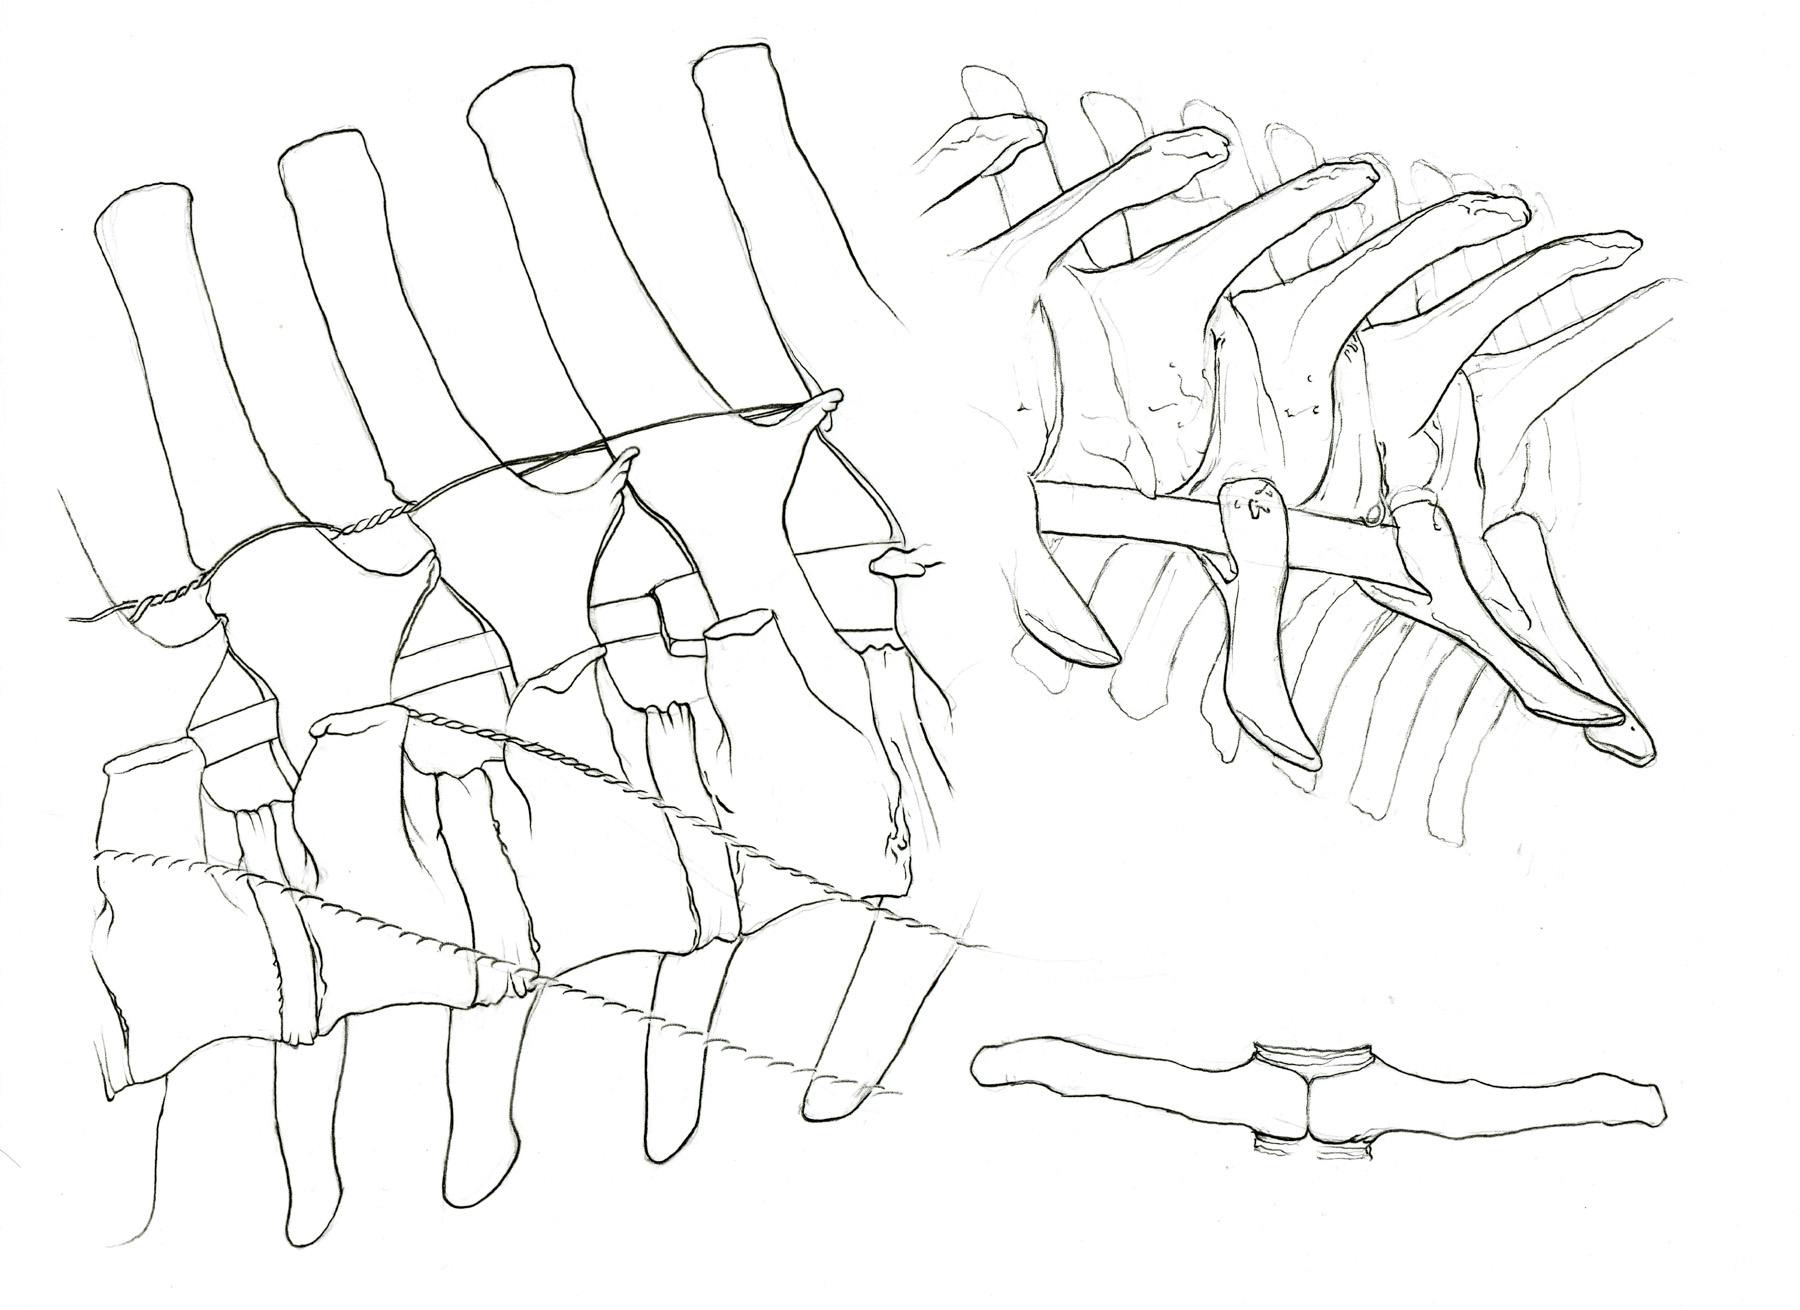 Line drawings of sections of a spine.